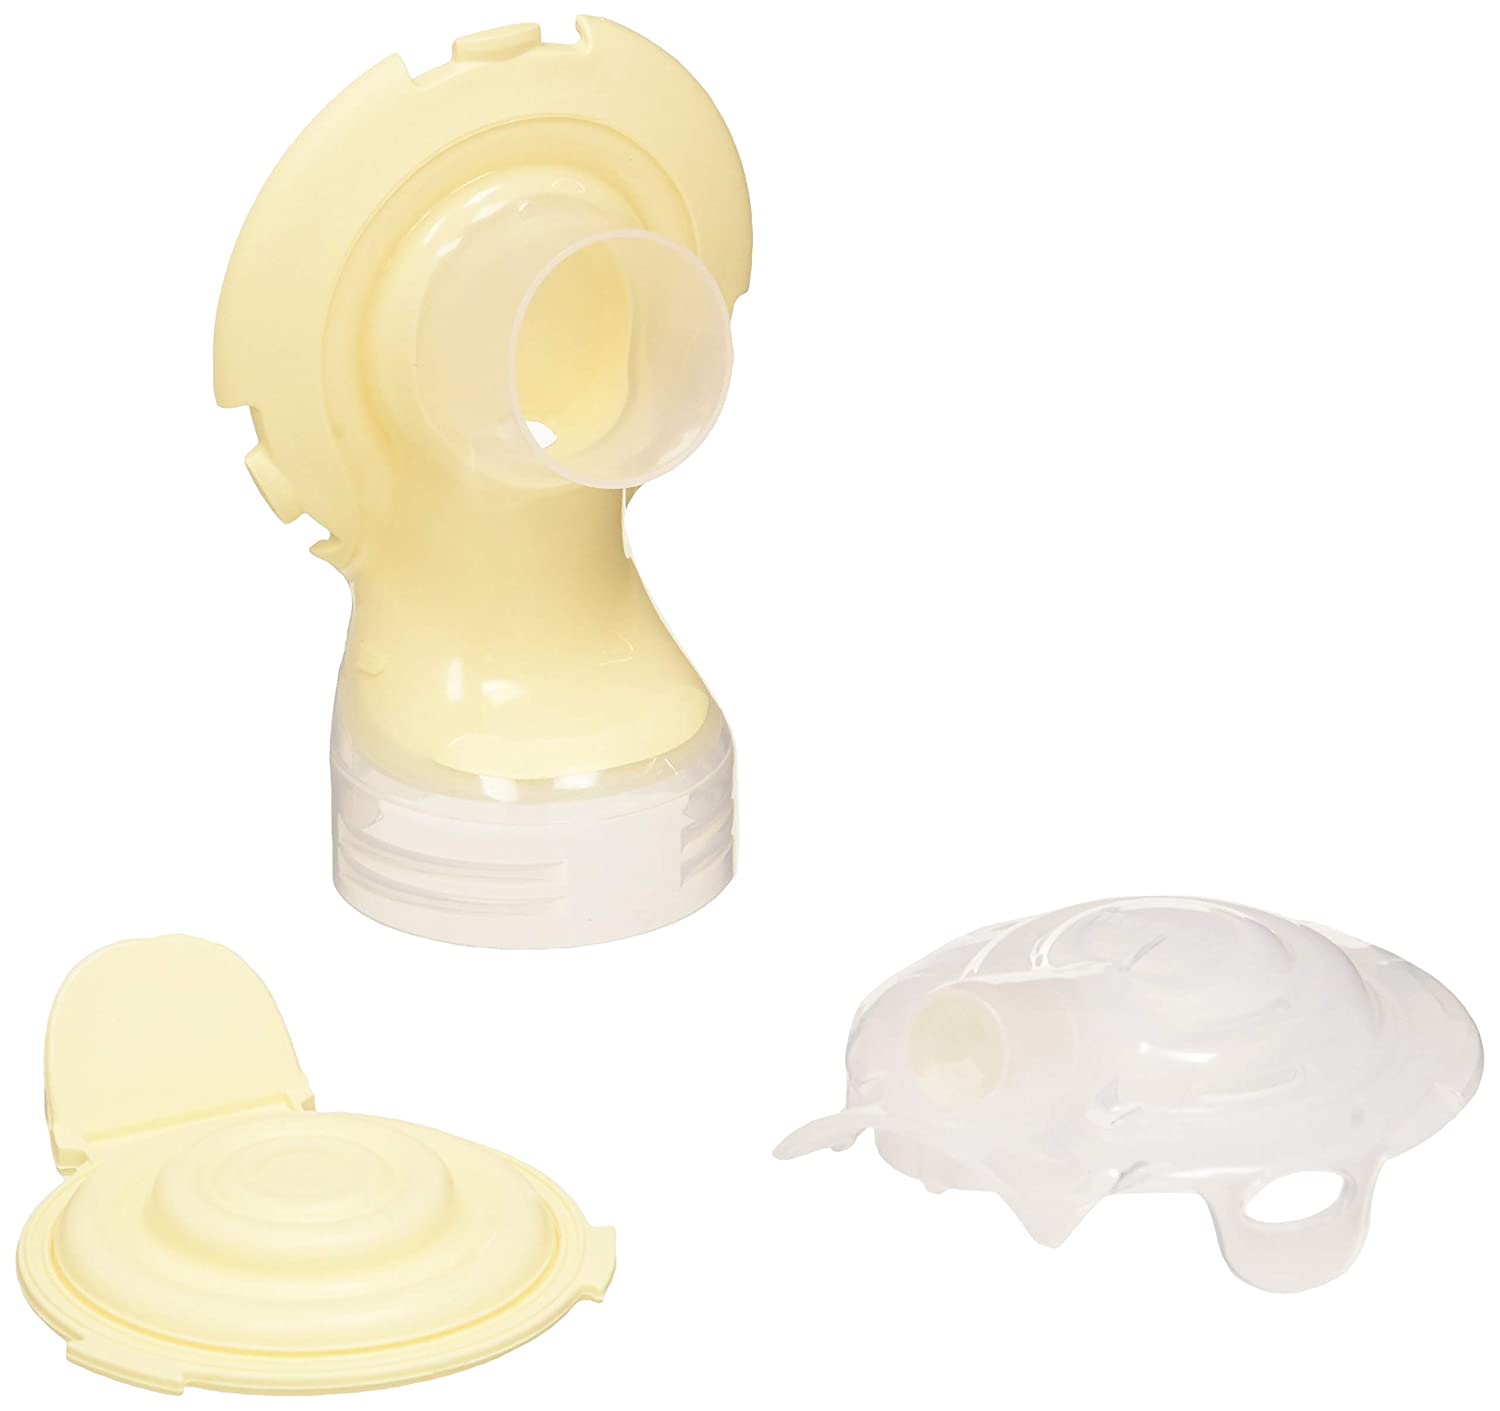 Medela Complete connection for Freestyle and Swing Maxi breast pumps, 1 piece, 400 g